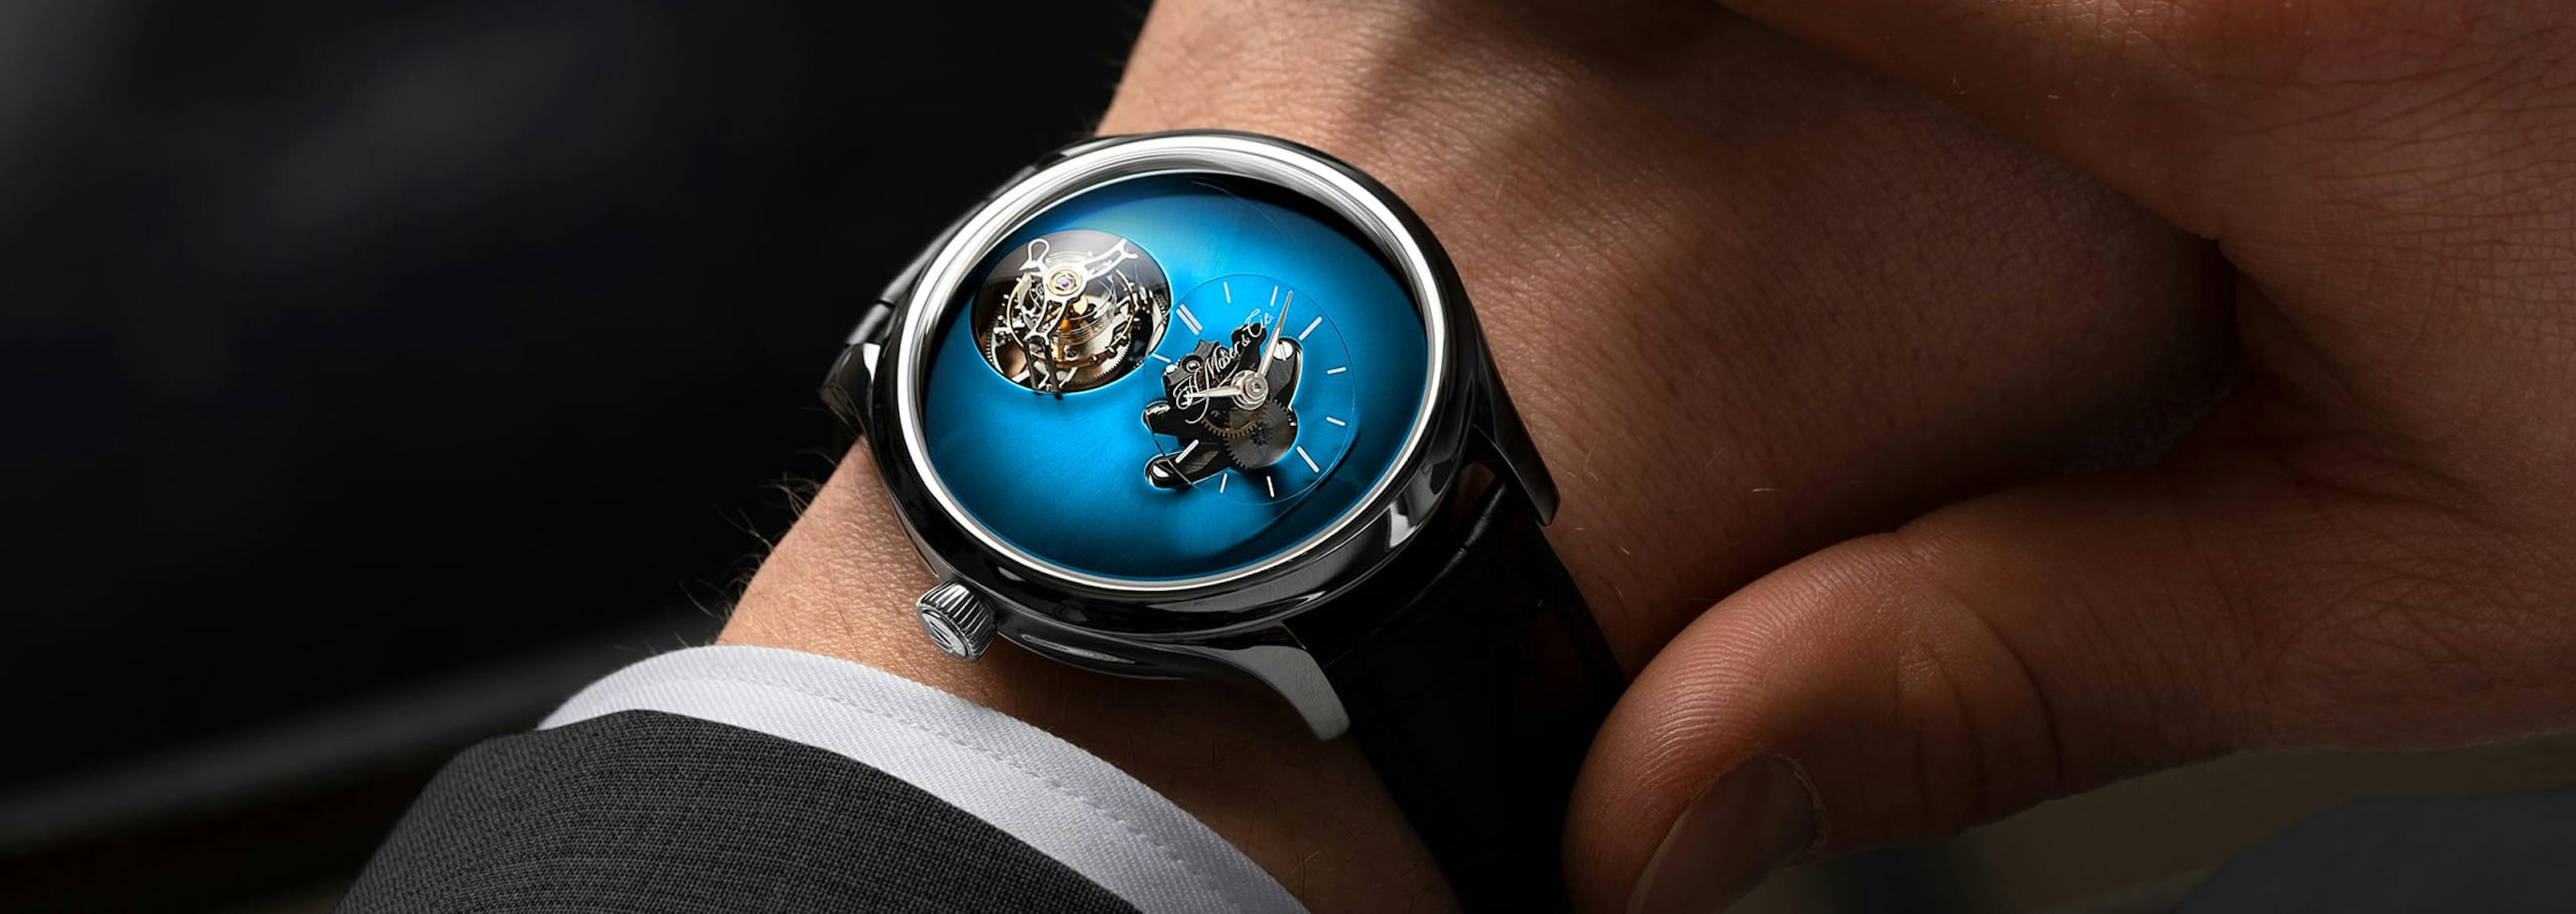 In Focus: H. Moser x MB&#038;F Endeavour Cylindrical Tourbillon Funky Blue